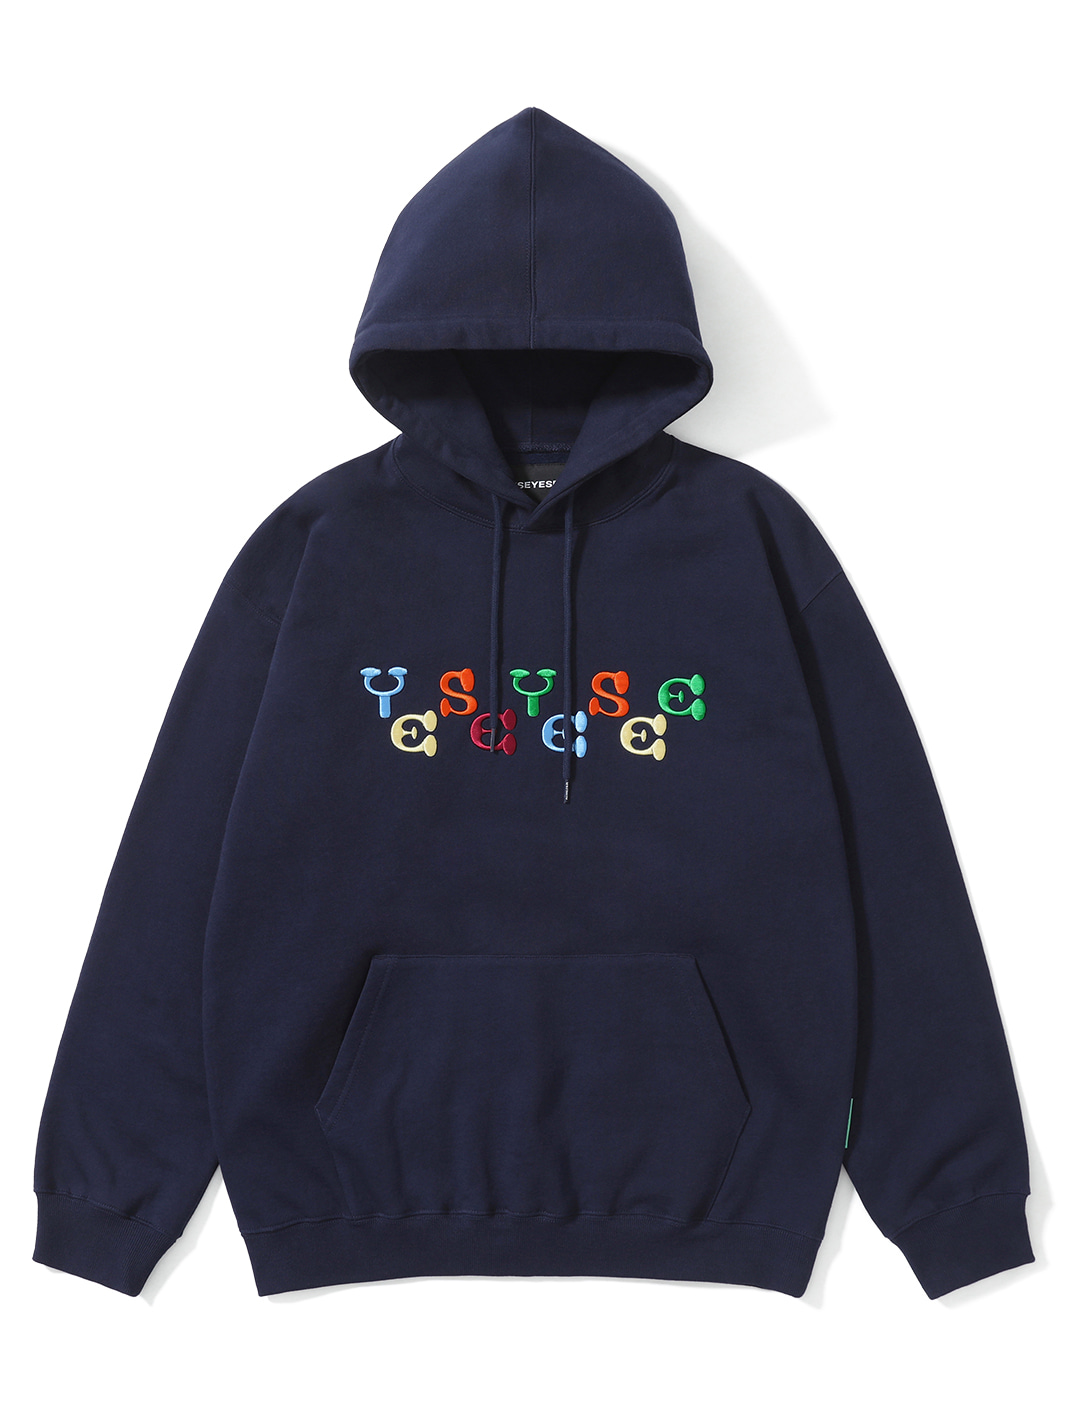 Color Embroidery Hoodie Navy